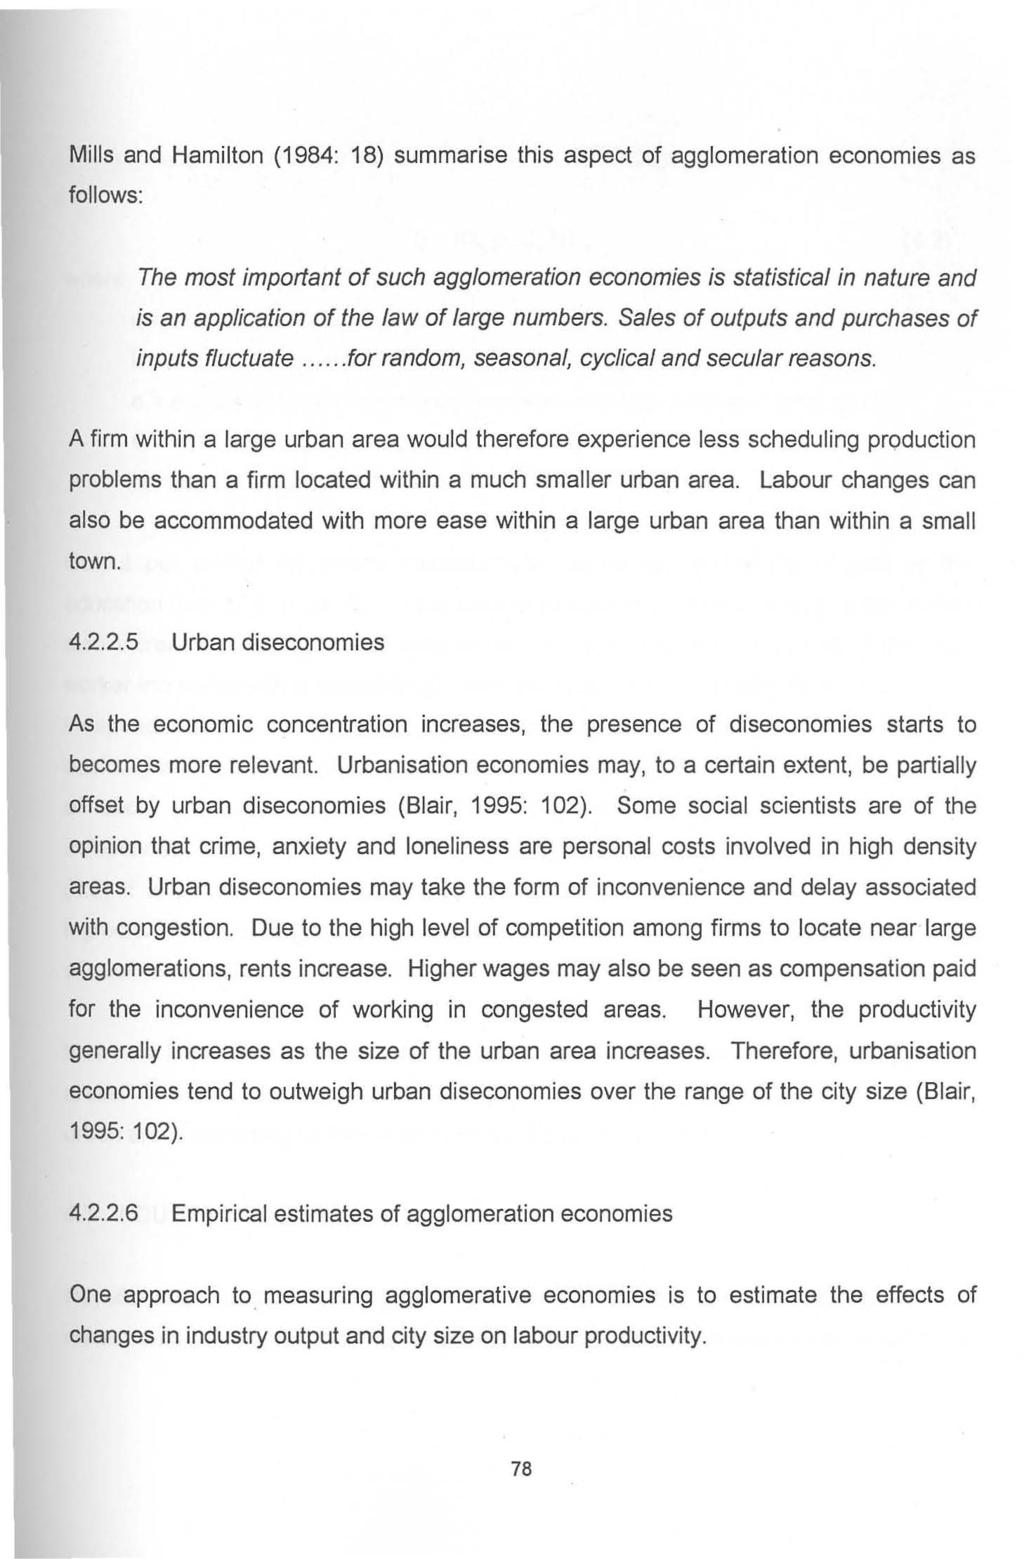 Mills and Hamilton (1984: 18) summarise this aspect of agglomeration economies as follows: The most important of such agglomeration economies is statistical in nature and is an application of the law